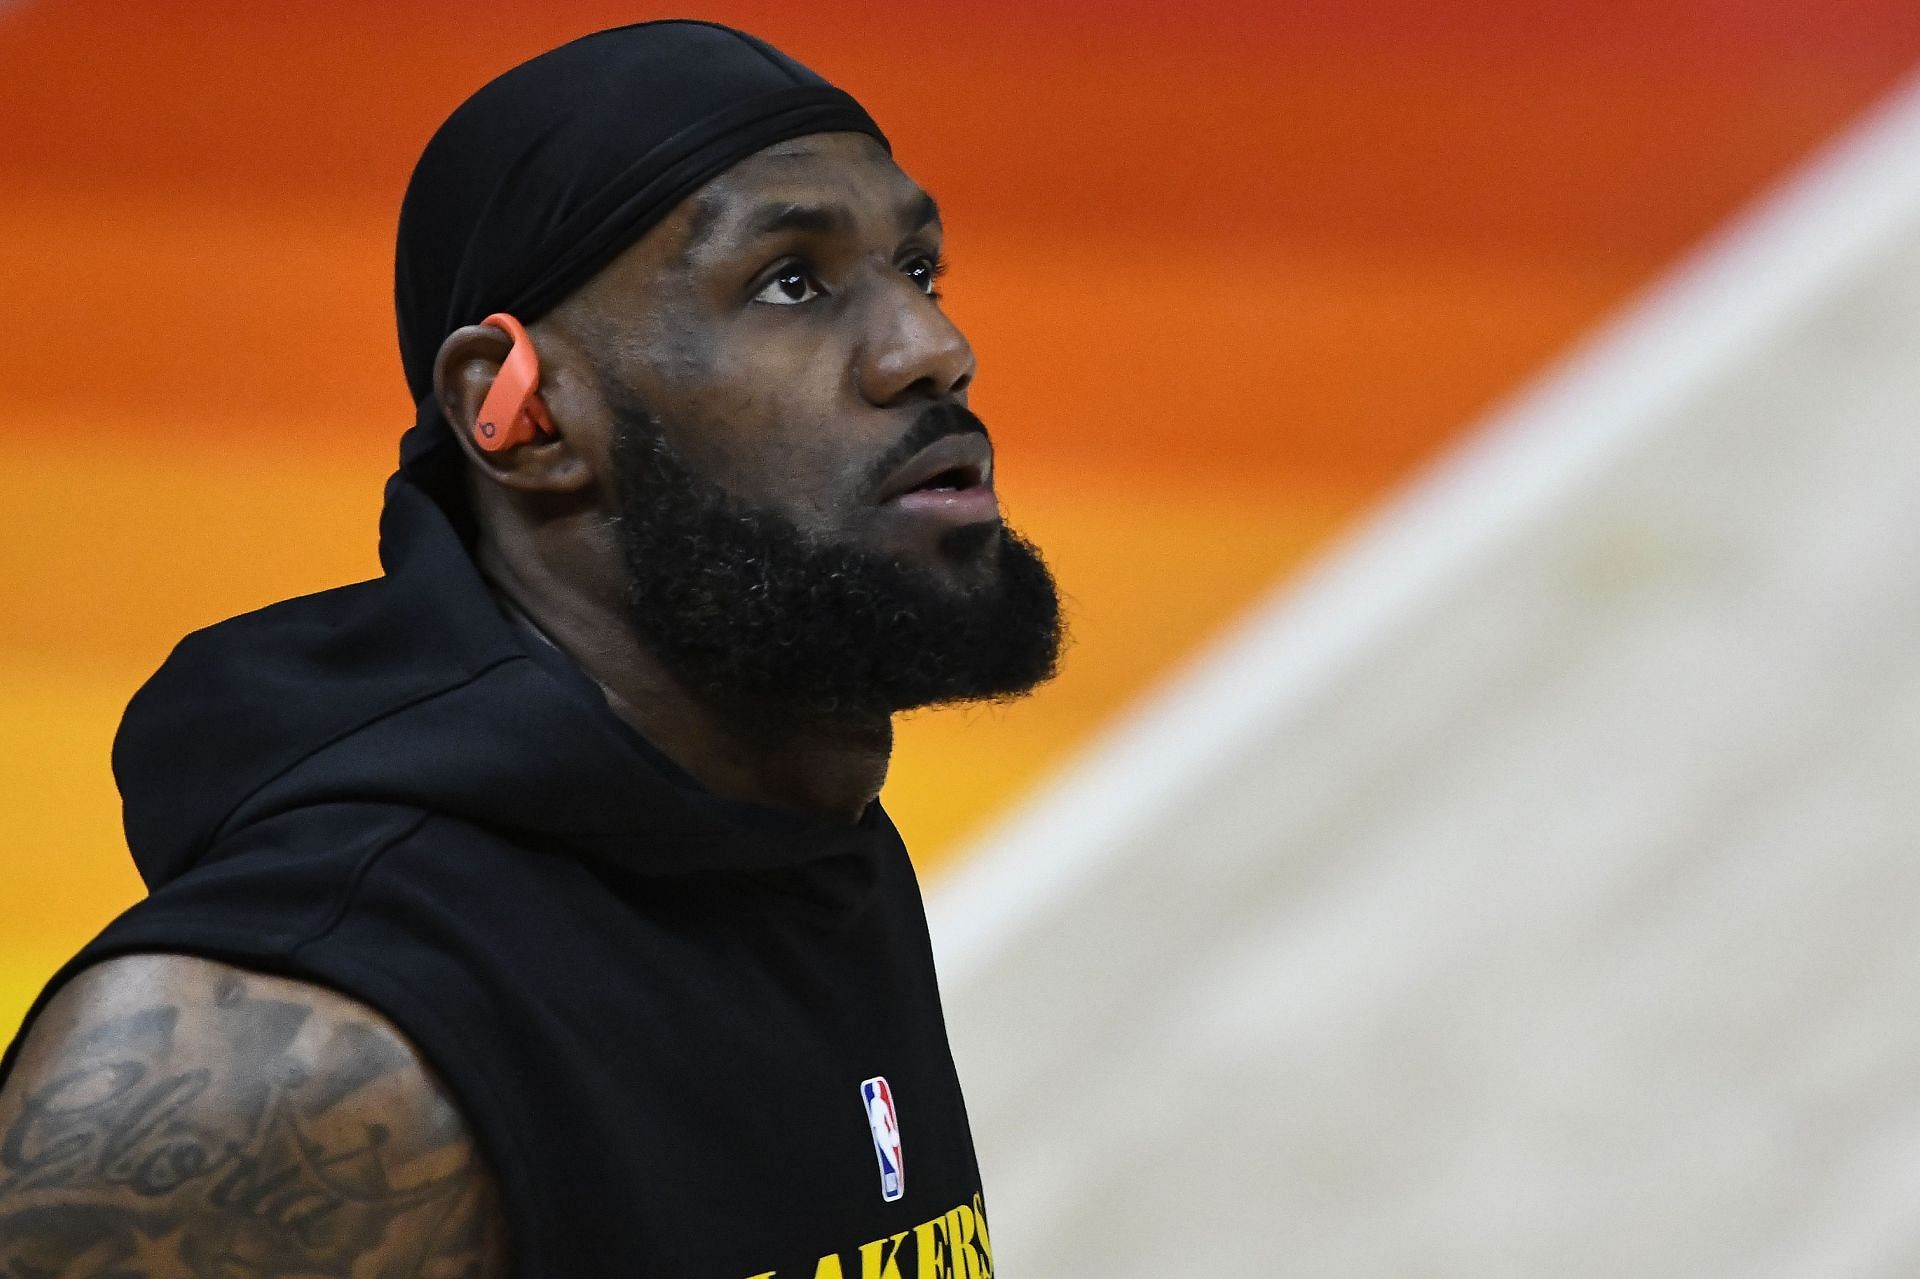 “20 minutes before the game start, and I’m just looking like ‘oh I found this mother******’” – LeBron James on looking for a ‘LeBron hater’ in the crowd to motivate himself